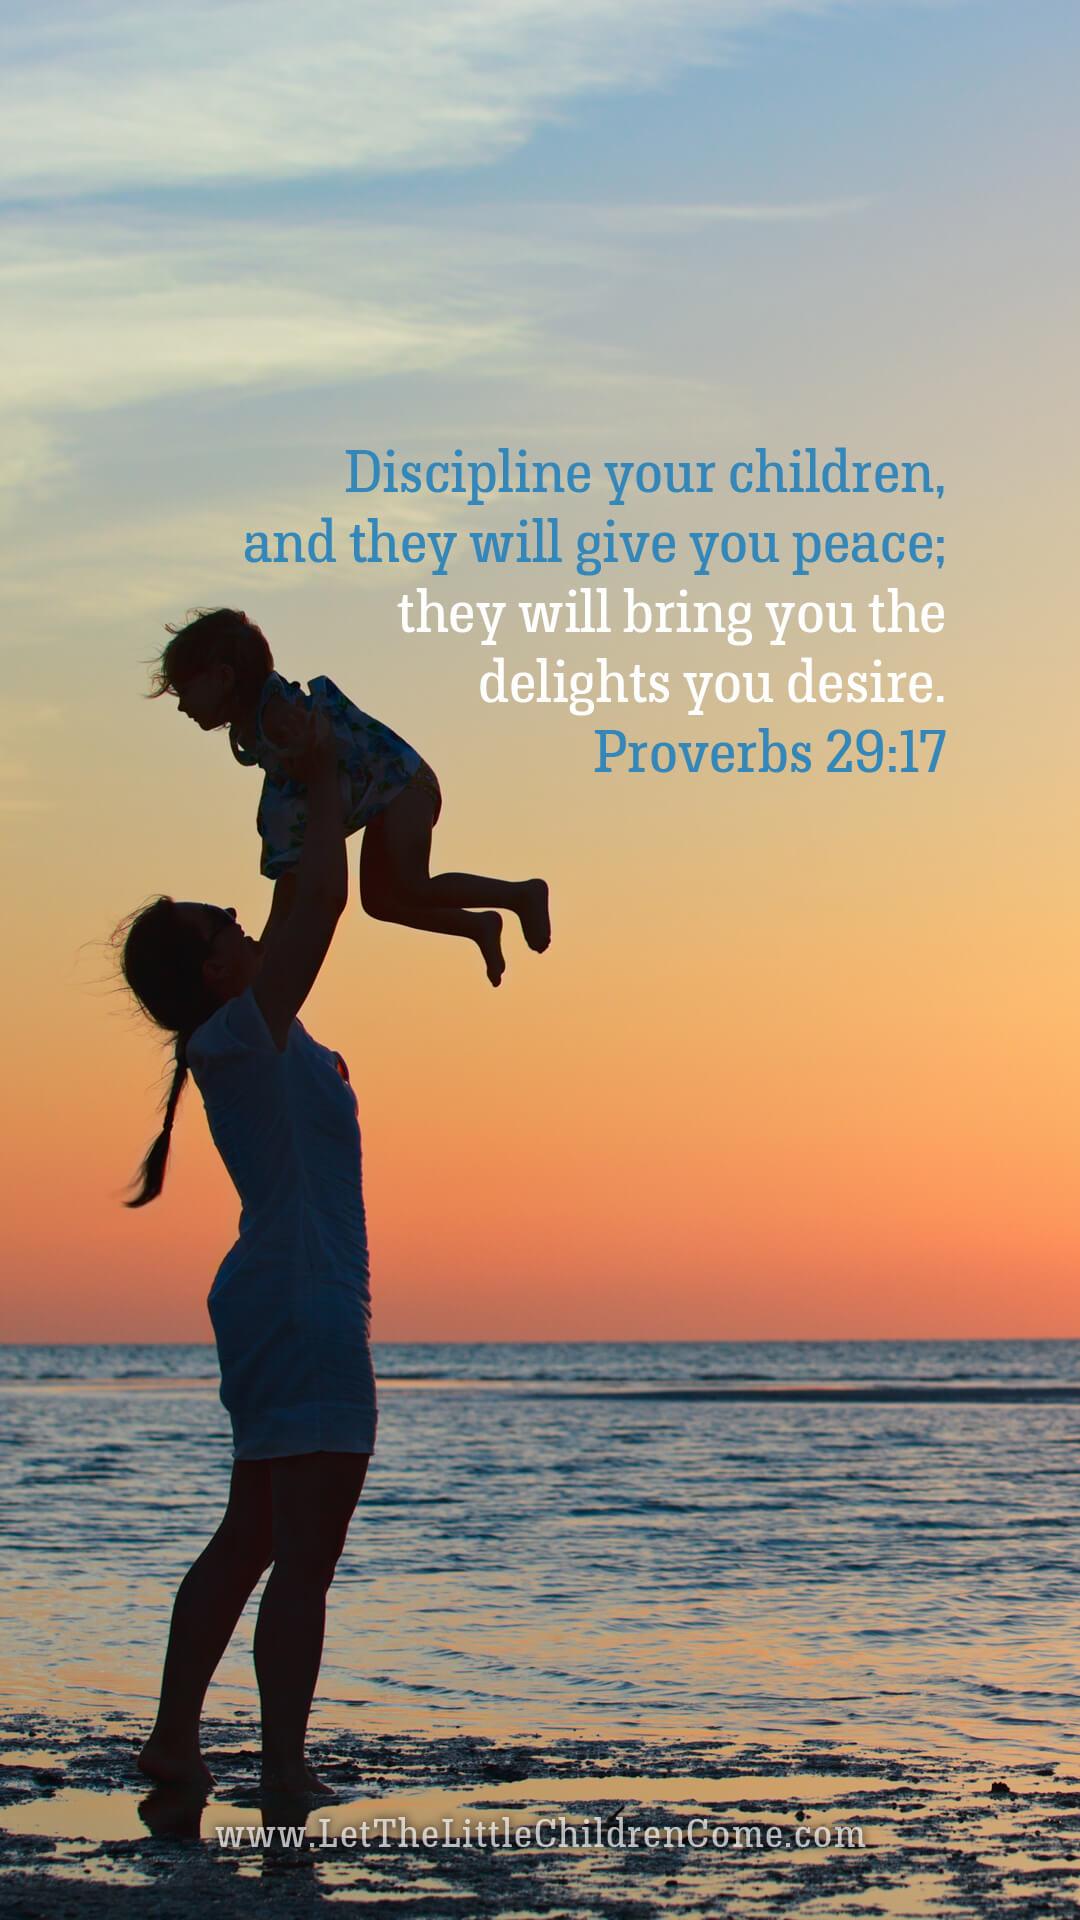 Bible Verses About Children. Quotes from Scripture About Kids